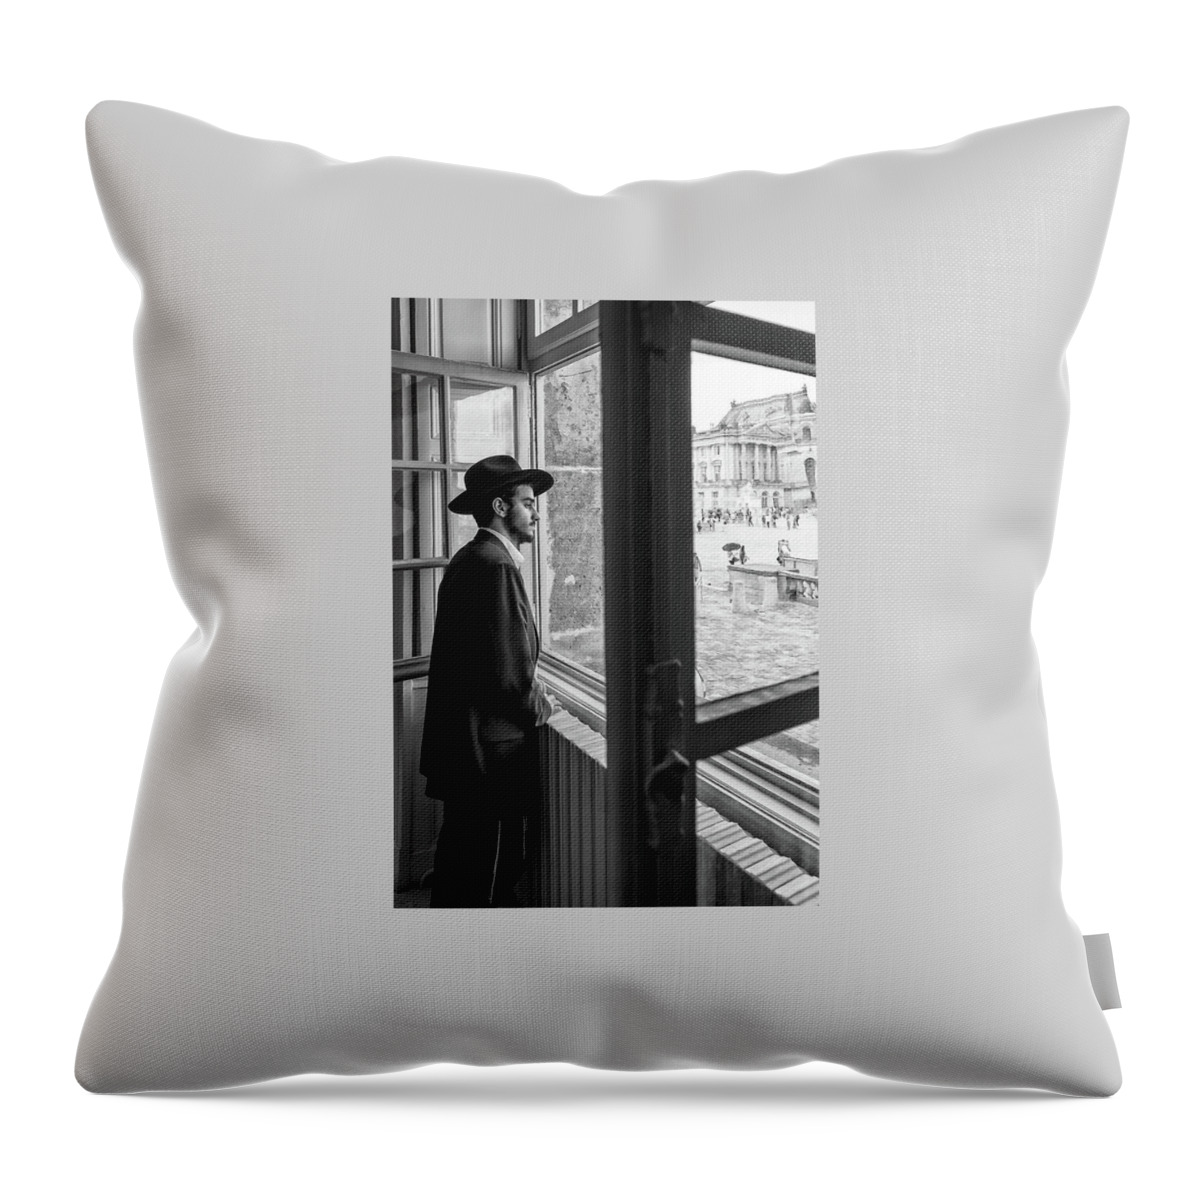 Alone Throw Pillow featuring the photograph Paris Man in Museum by Louis Dallara